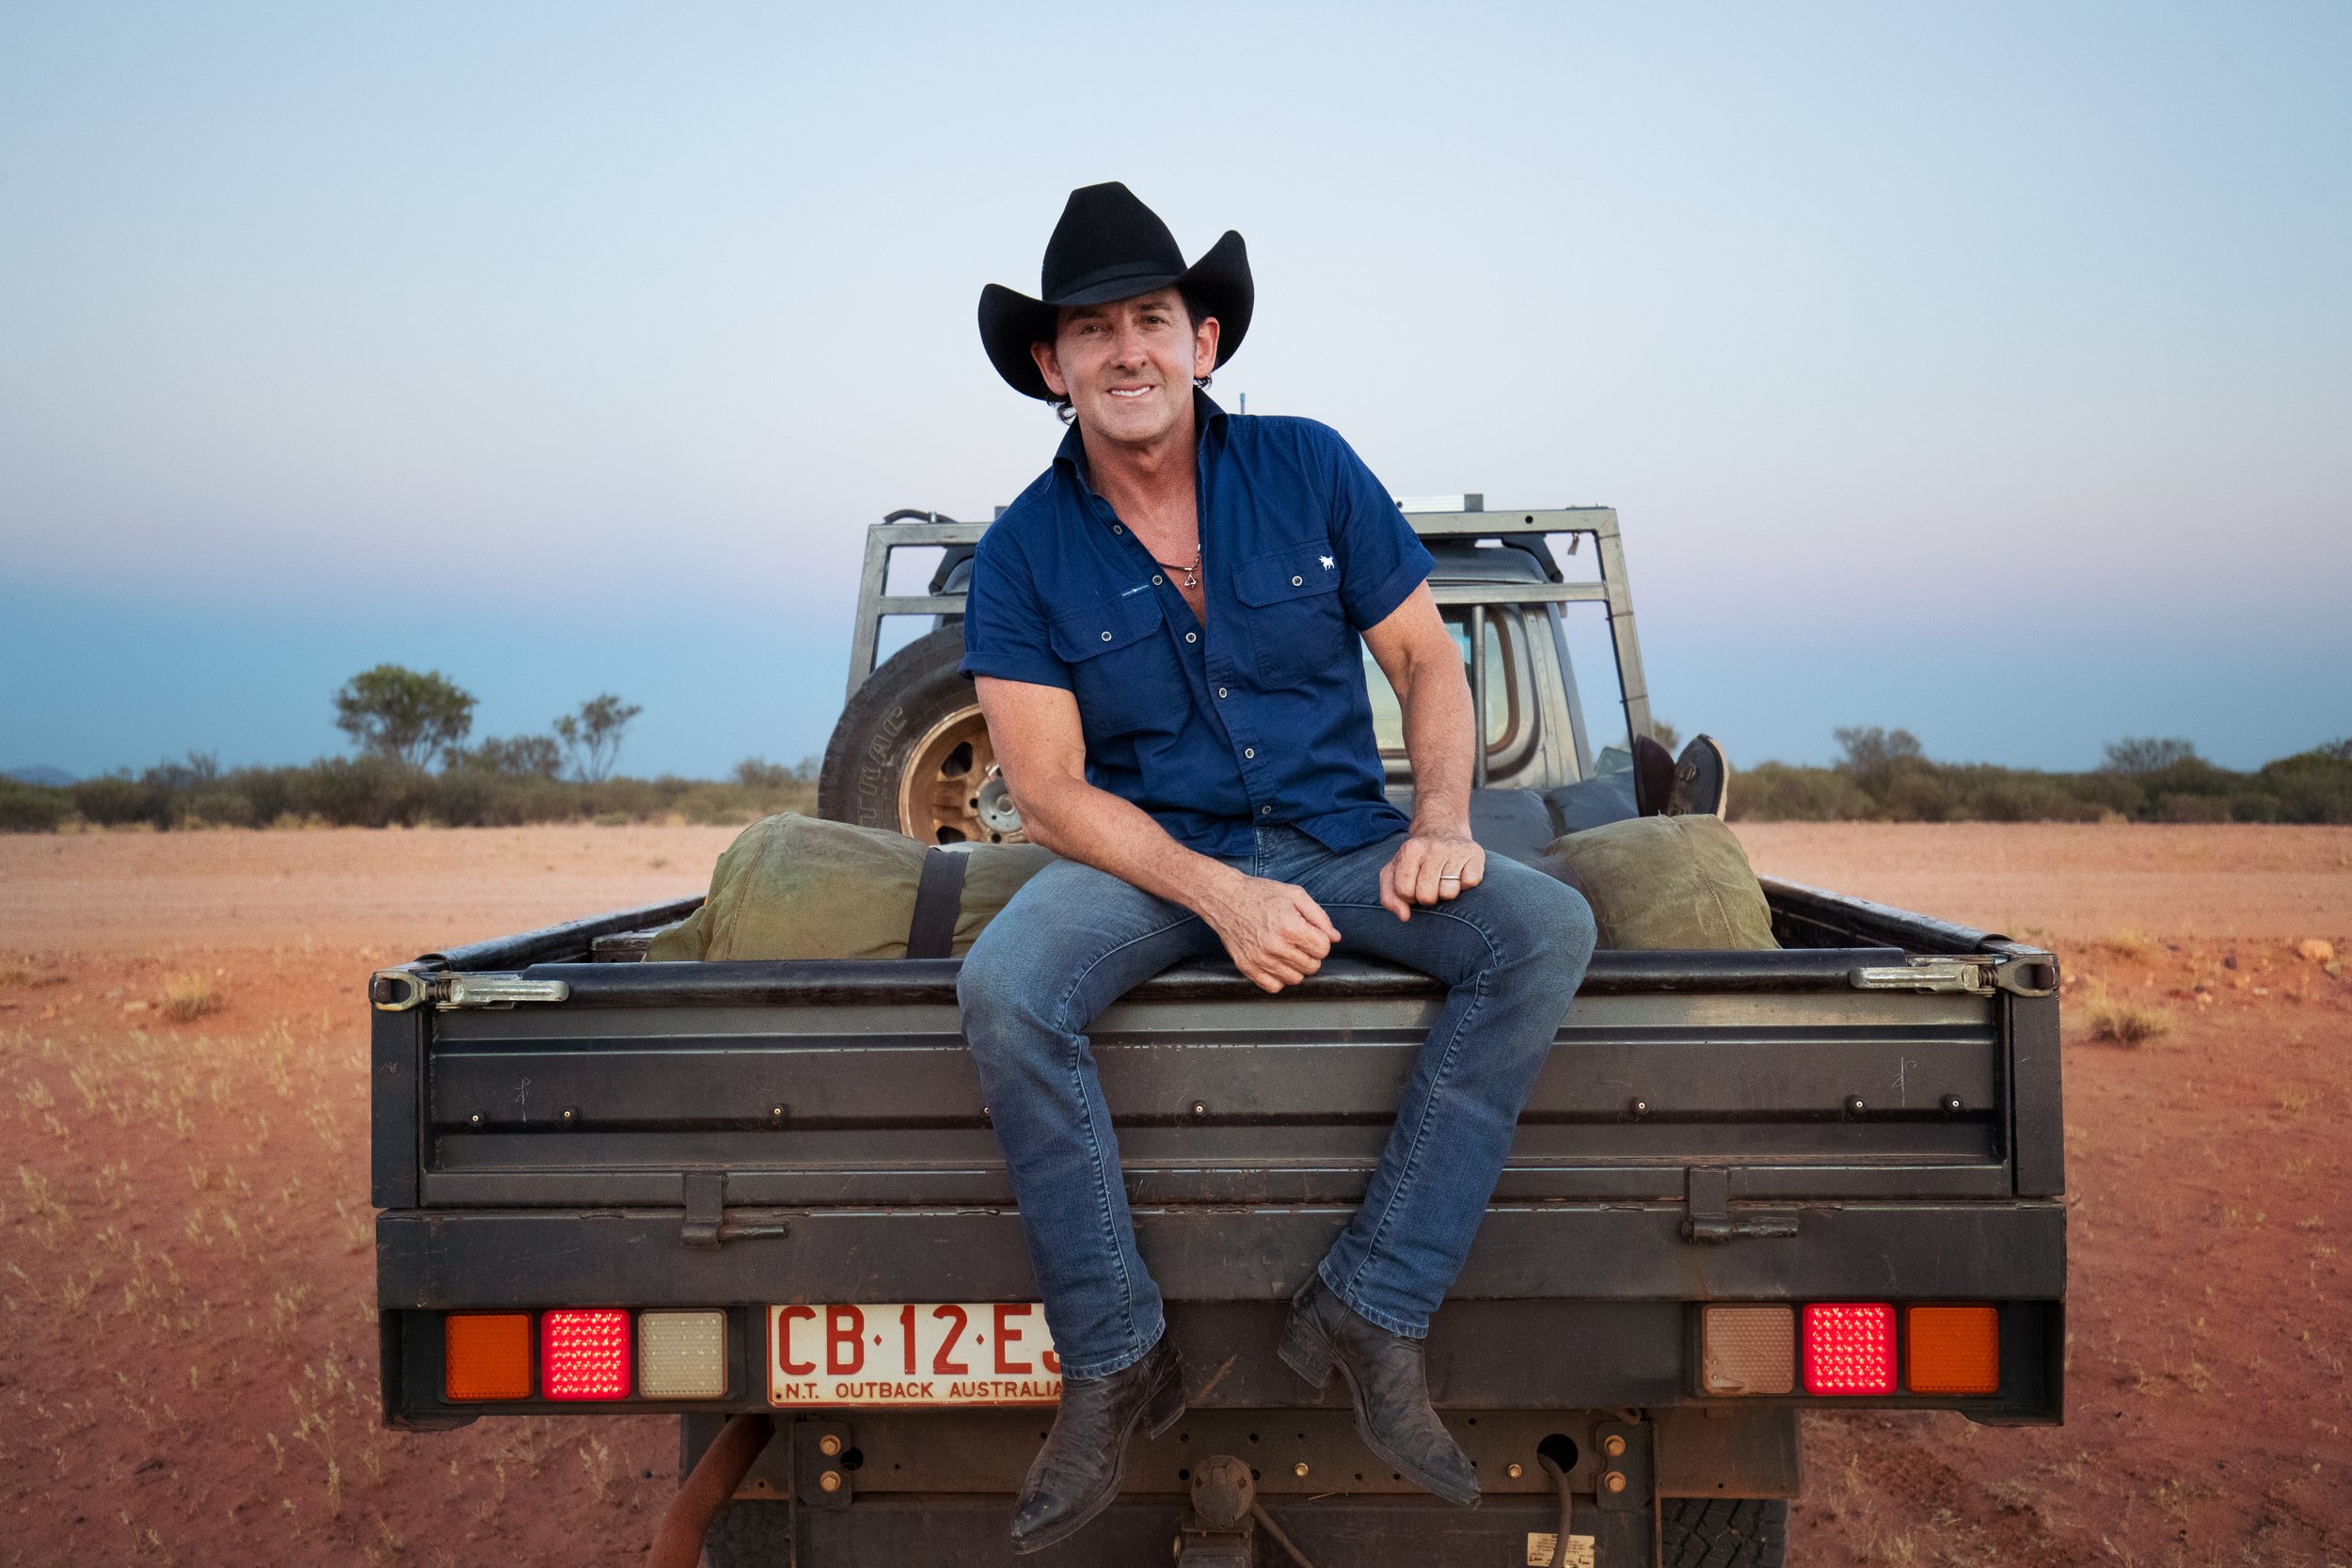 CLICK HERE FOR LEE KERNAGHAN TOUR DATES